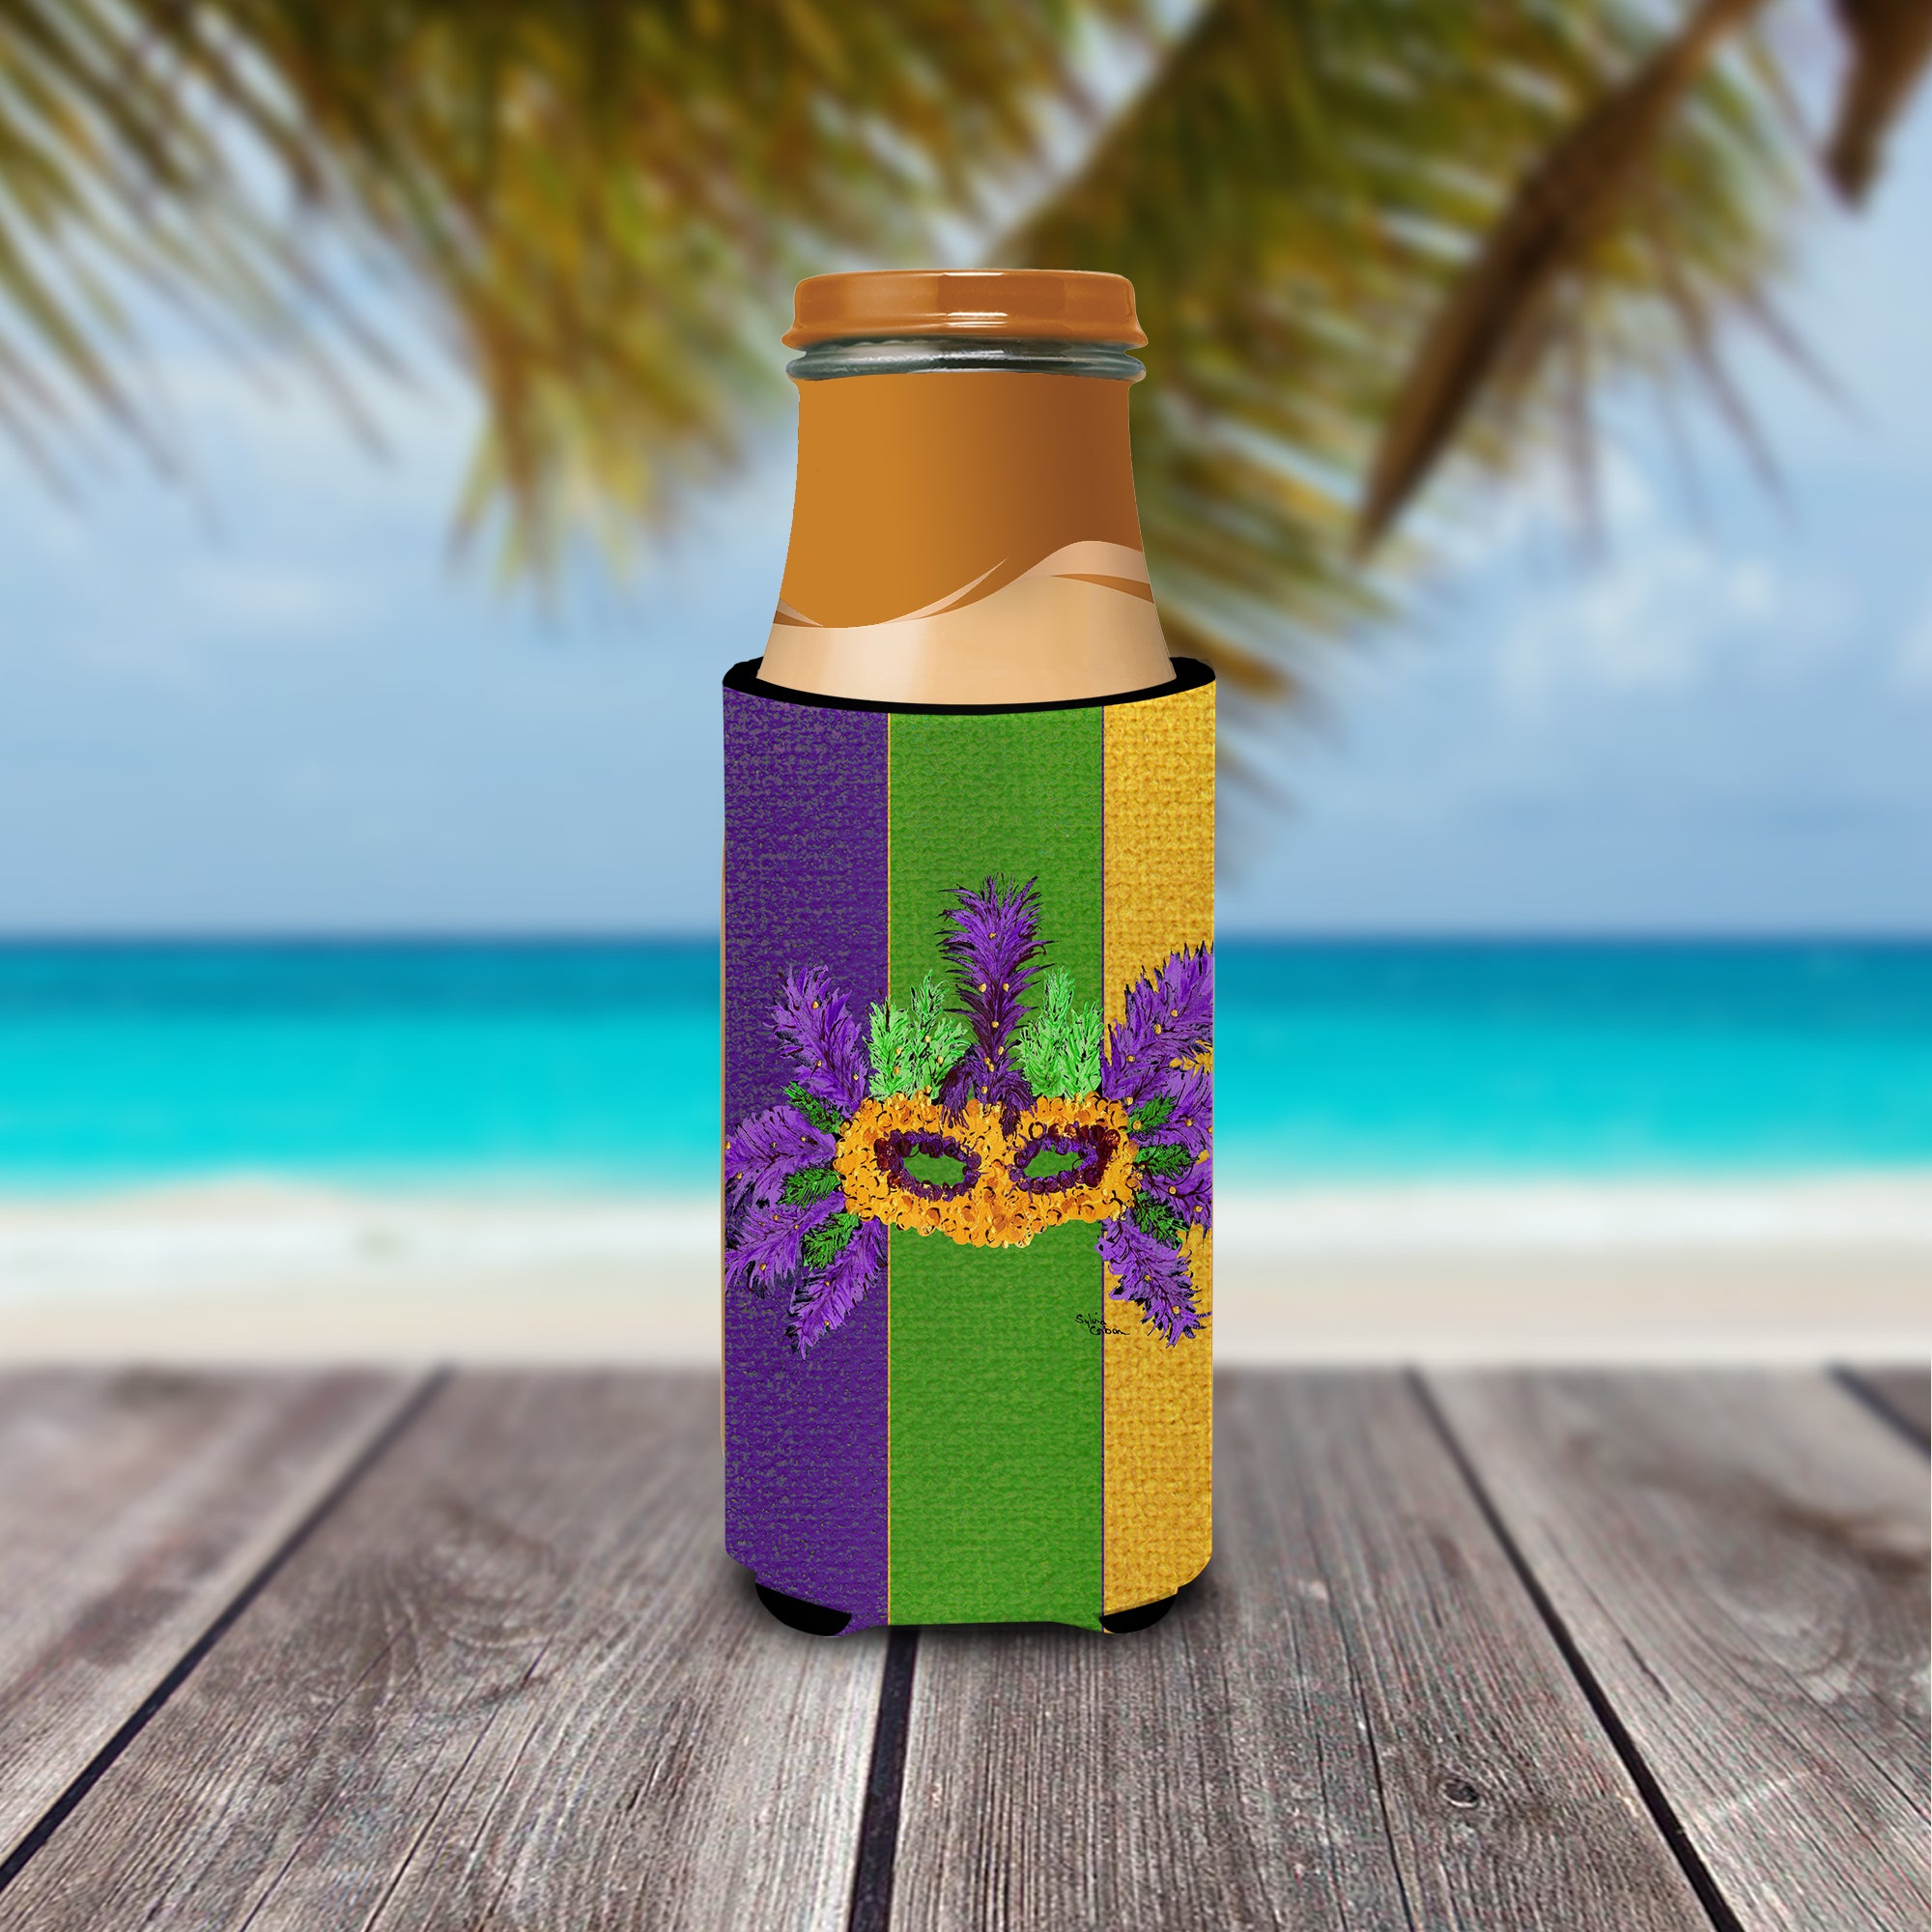 Mardi Gras with Feathers Ultra Beverage Insulators for slim cans 8369MUK